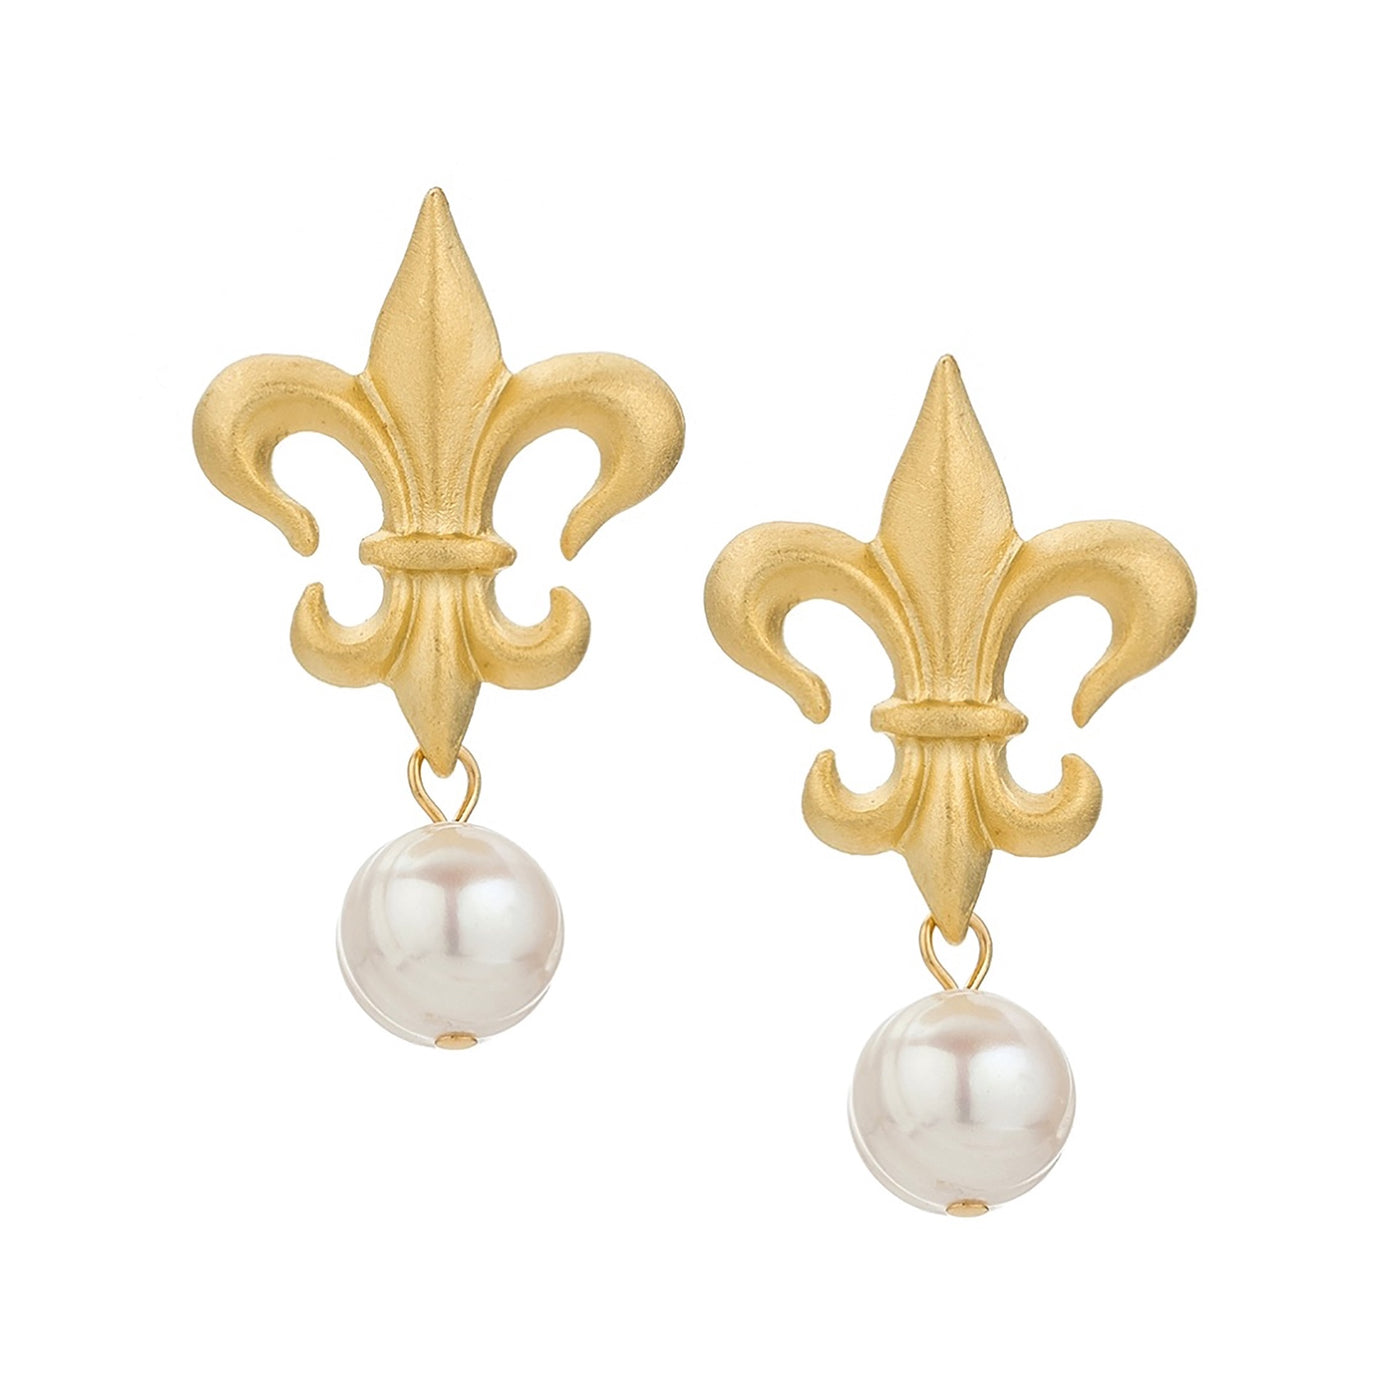 24k Gold Plated Fleur Earrings with Pearl Dangles